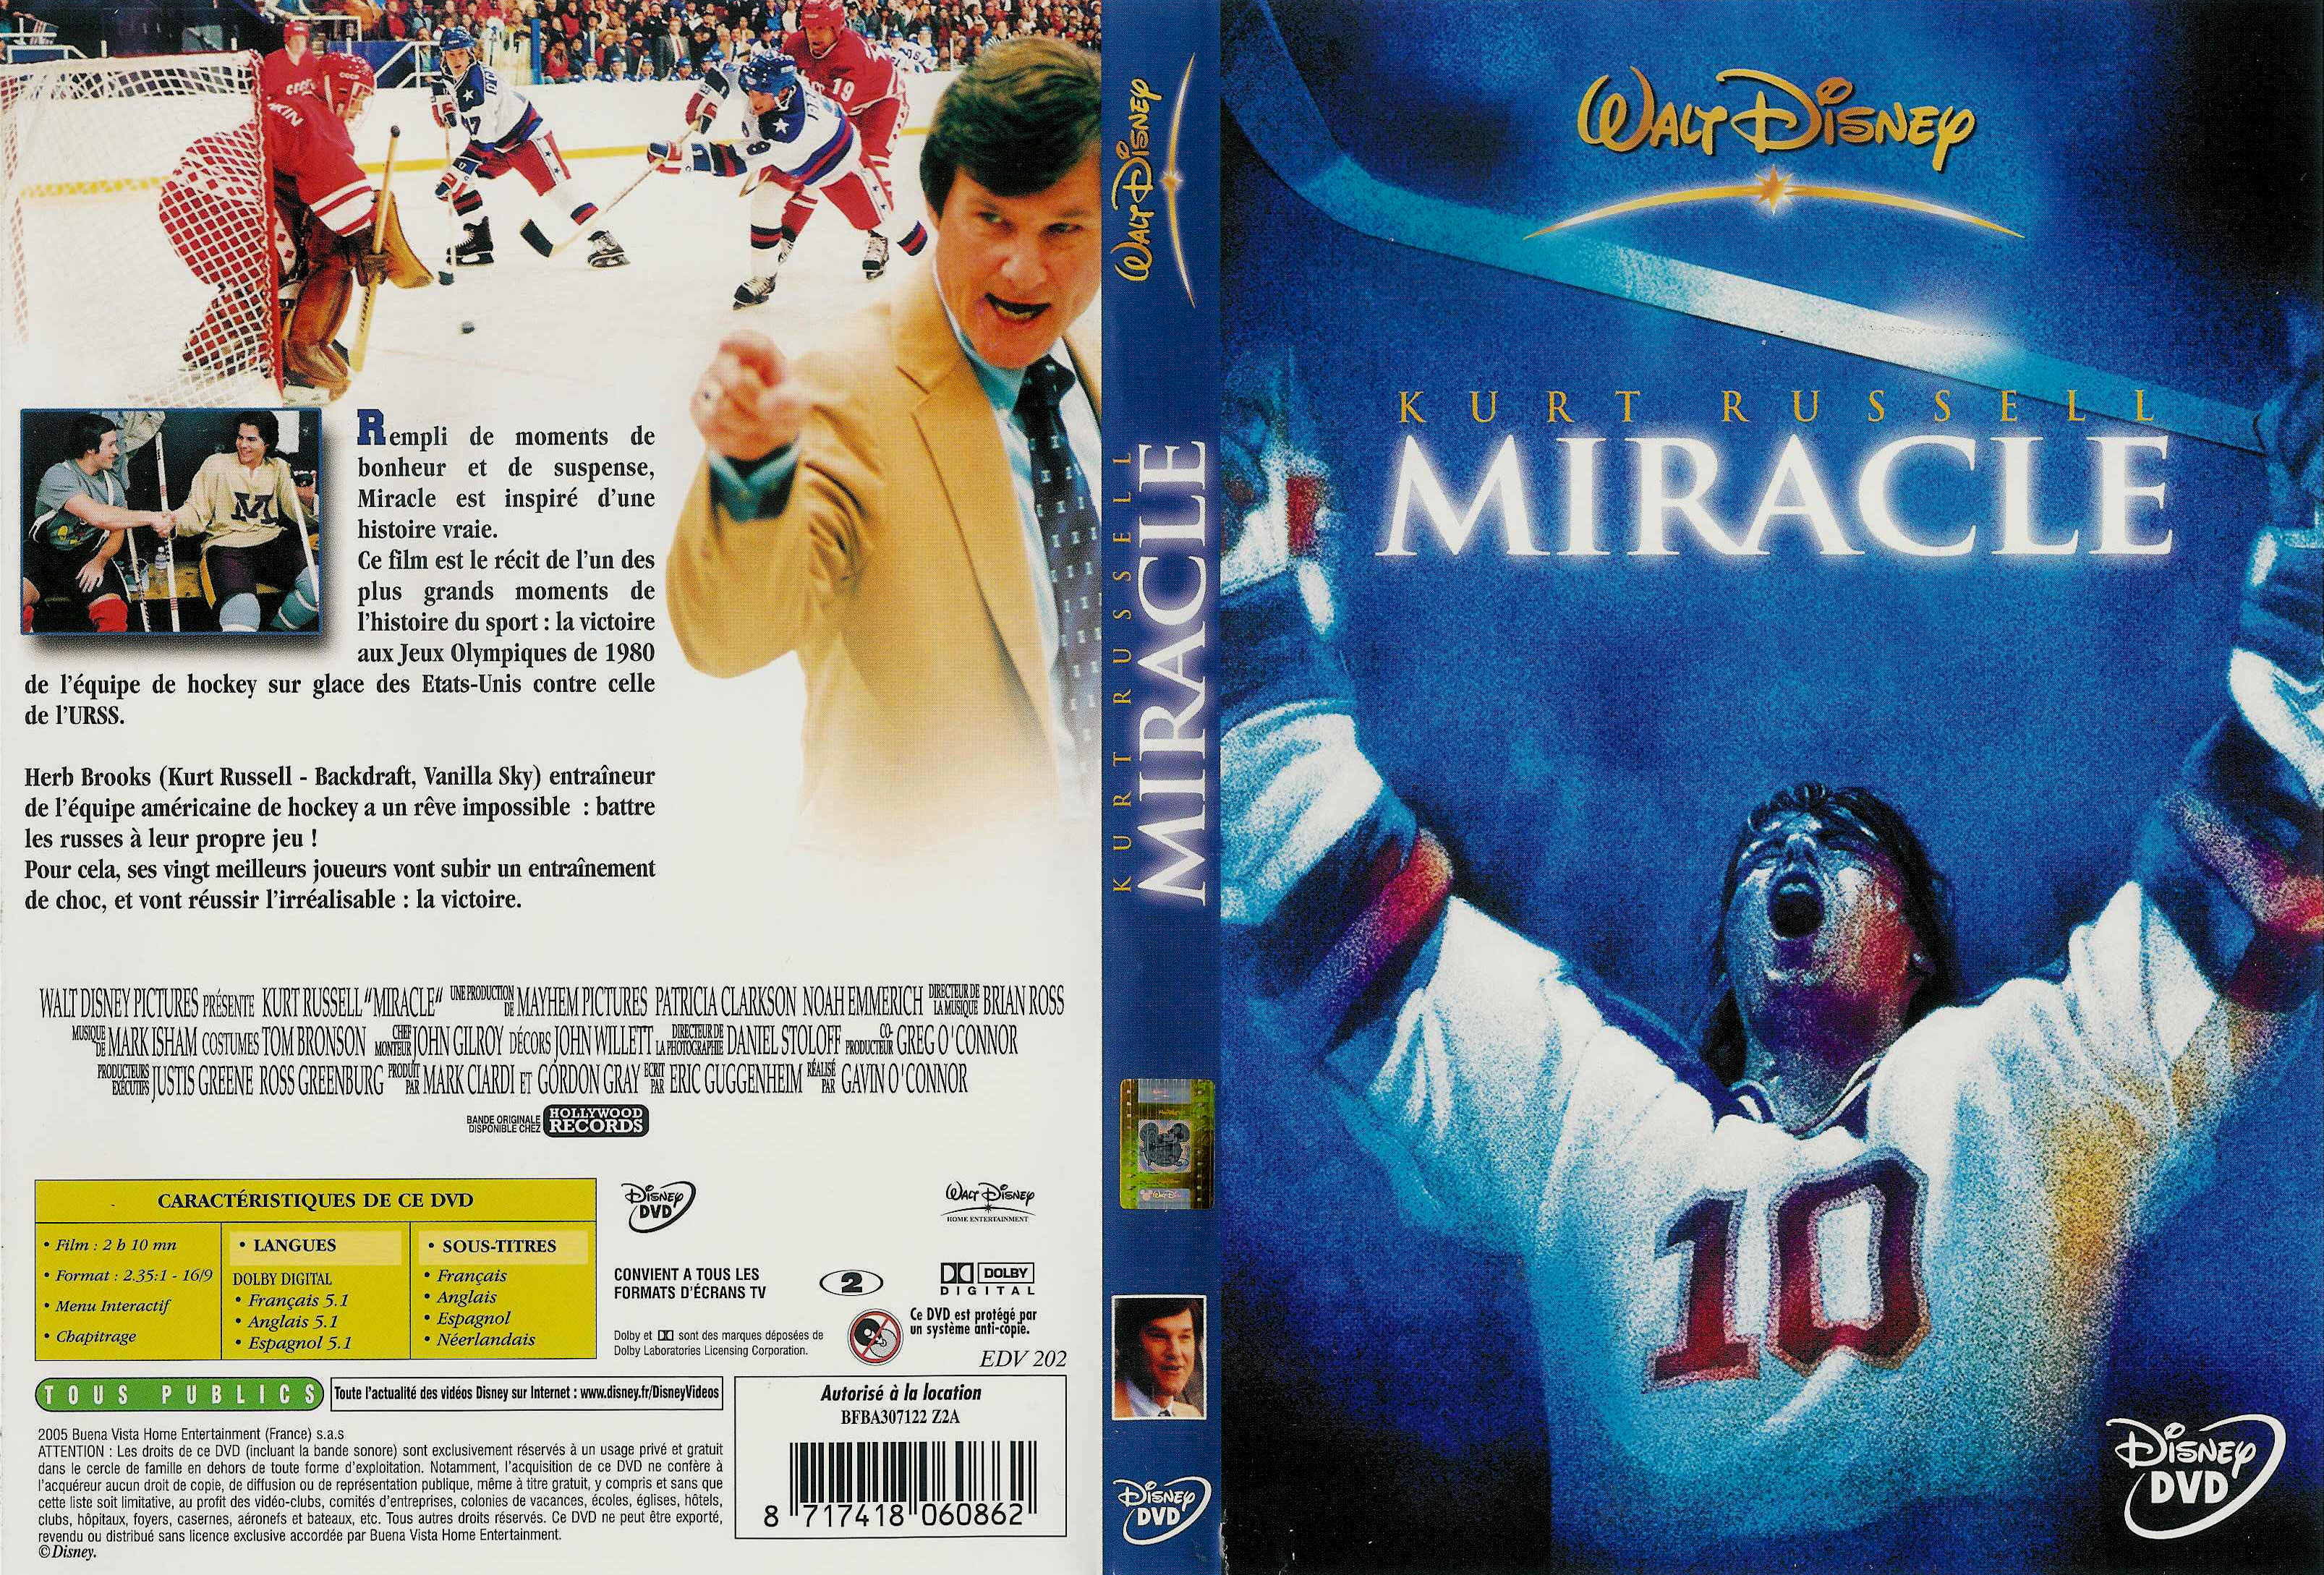 Jaquette DVD Miracle